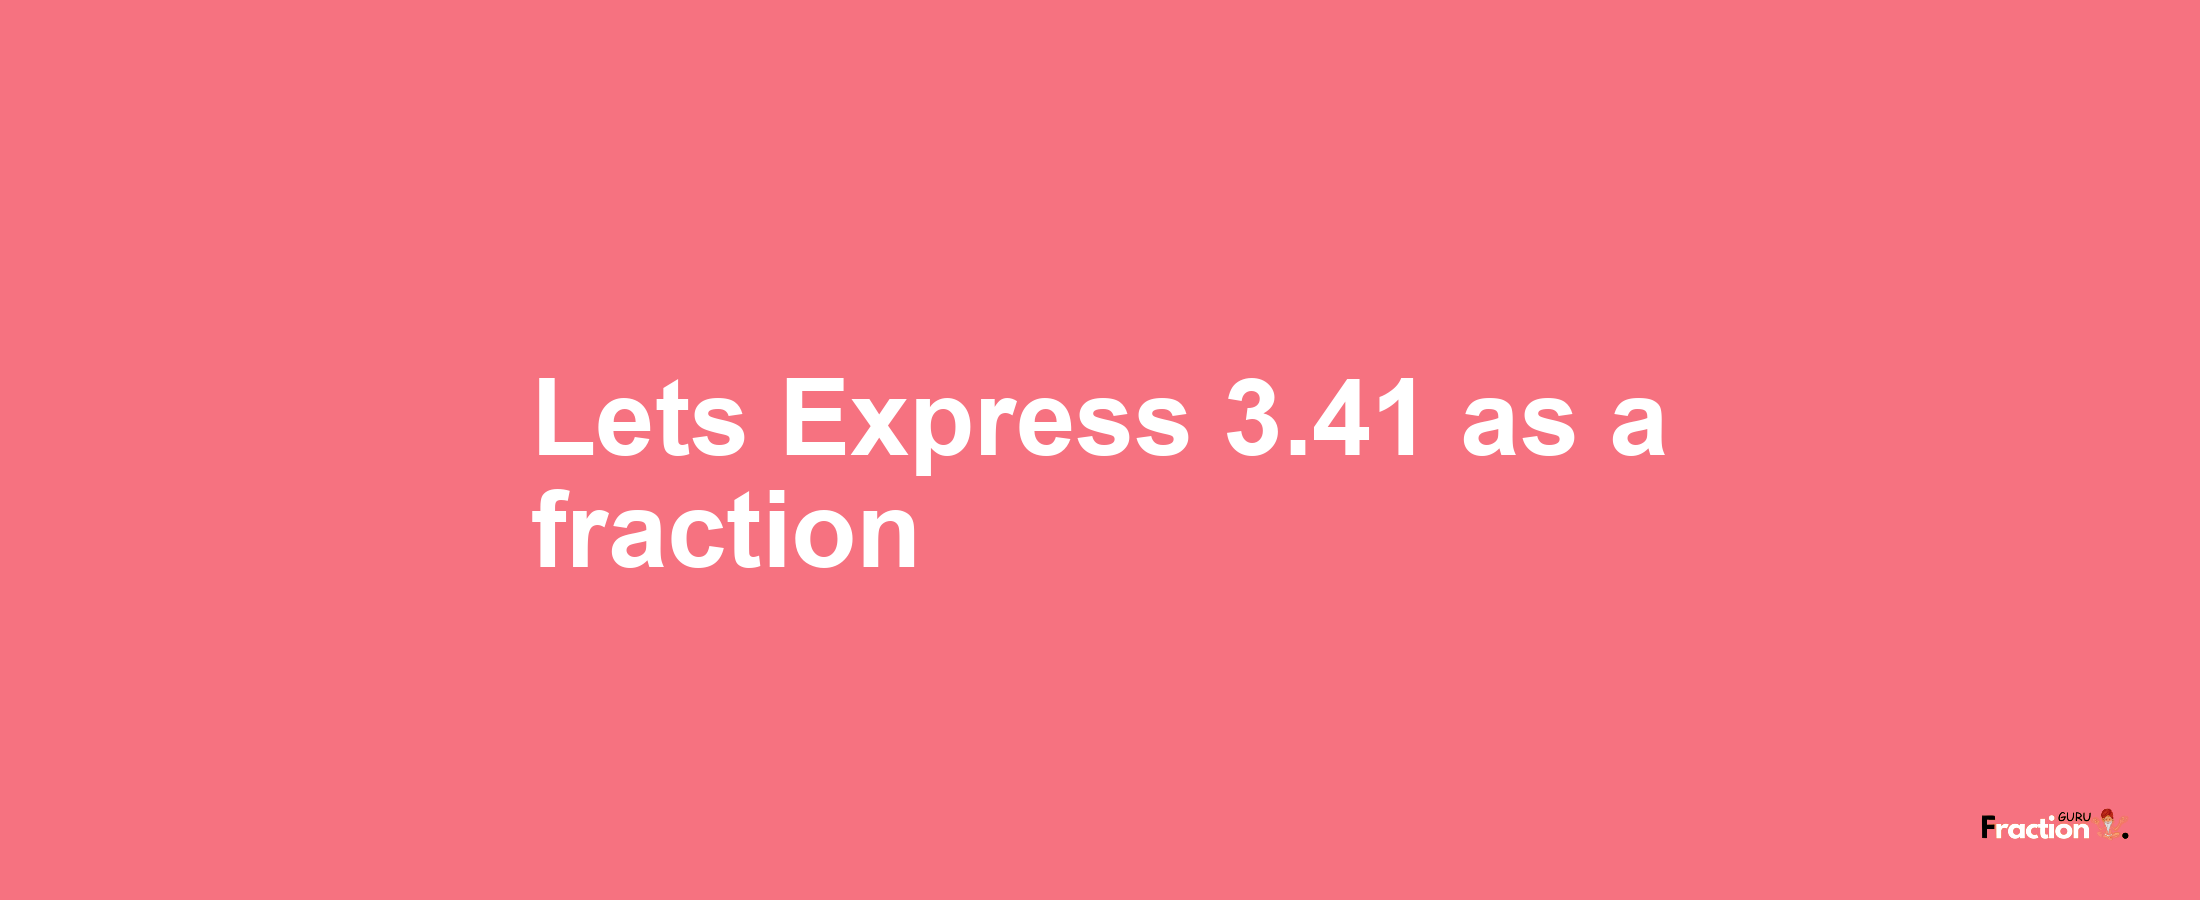 Lets Express 3.41 as afraction